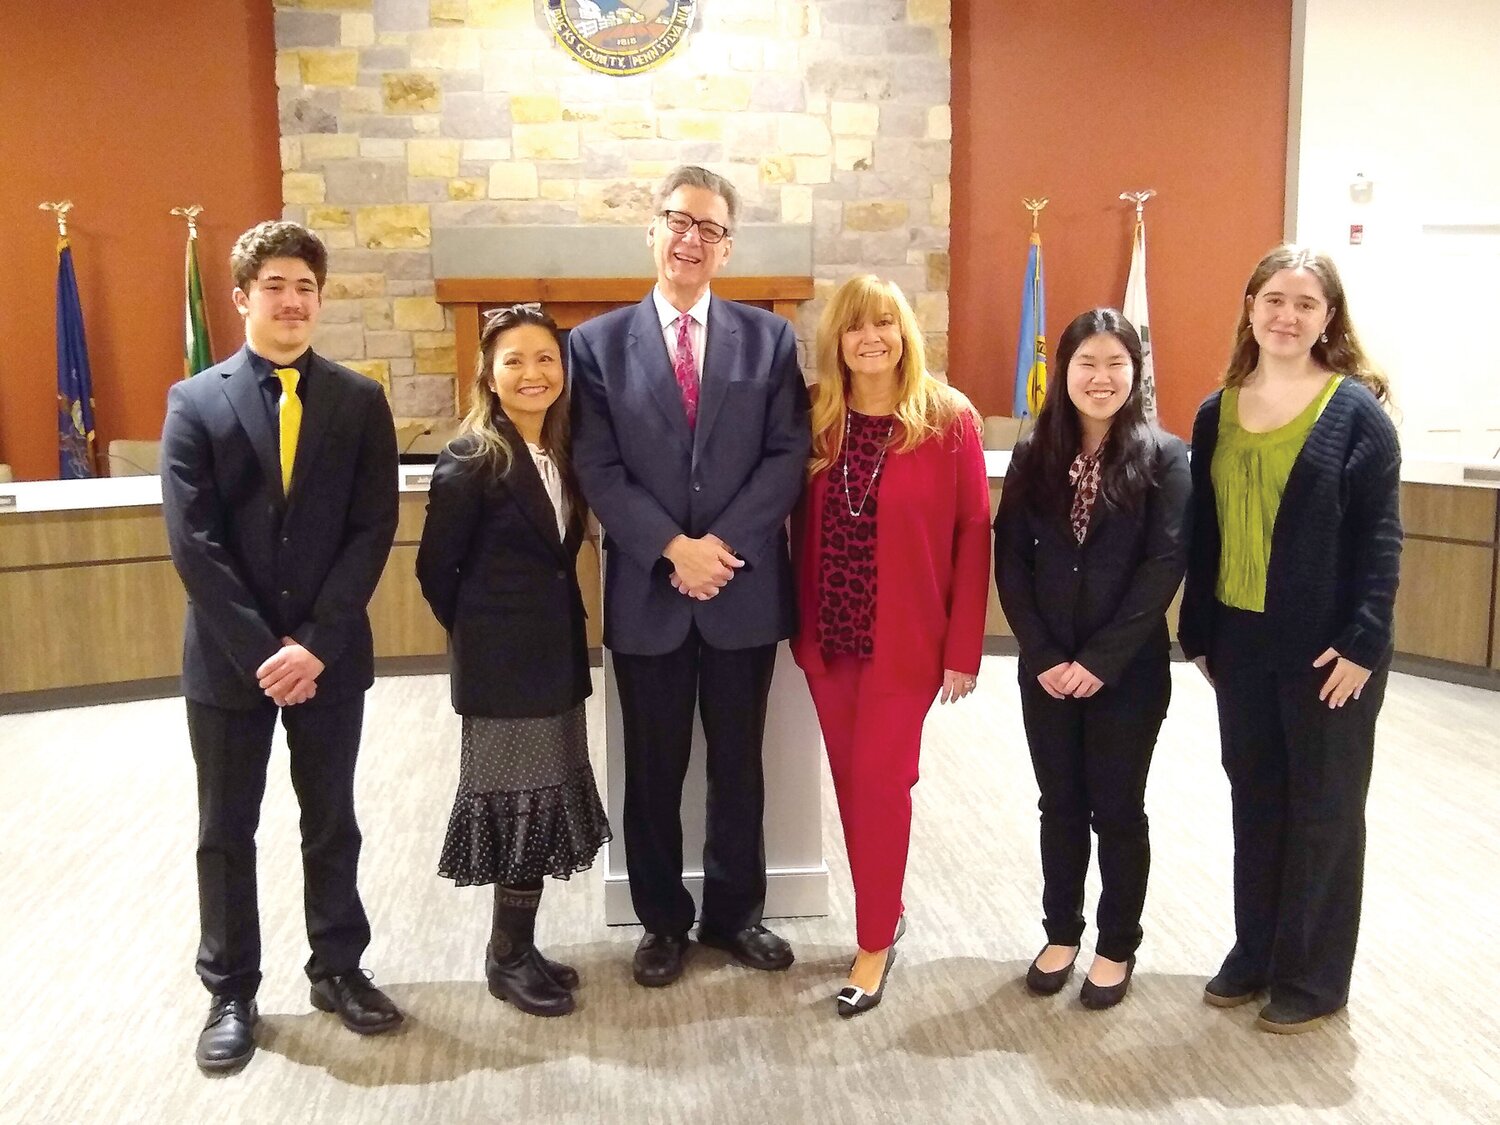 Rotary 4-Way Test winners Magnolia Demiri-Worman, Nicholas Mento and Olivia Cao with contest judges, Rotarian Katie Farrell, Warminster Rotary Club, Rose Yuan and Pat Rocchi, both of Toastmasters Doylestown. Missing from the photo is winner Lily Wu.